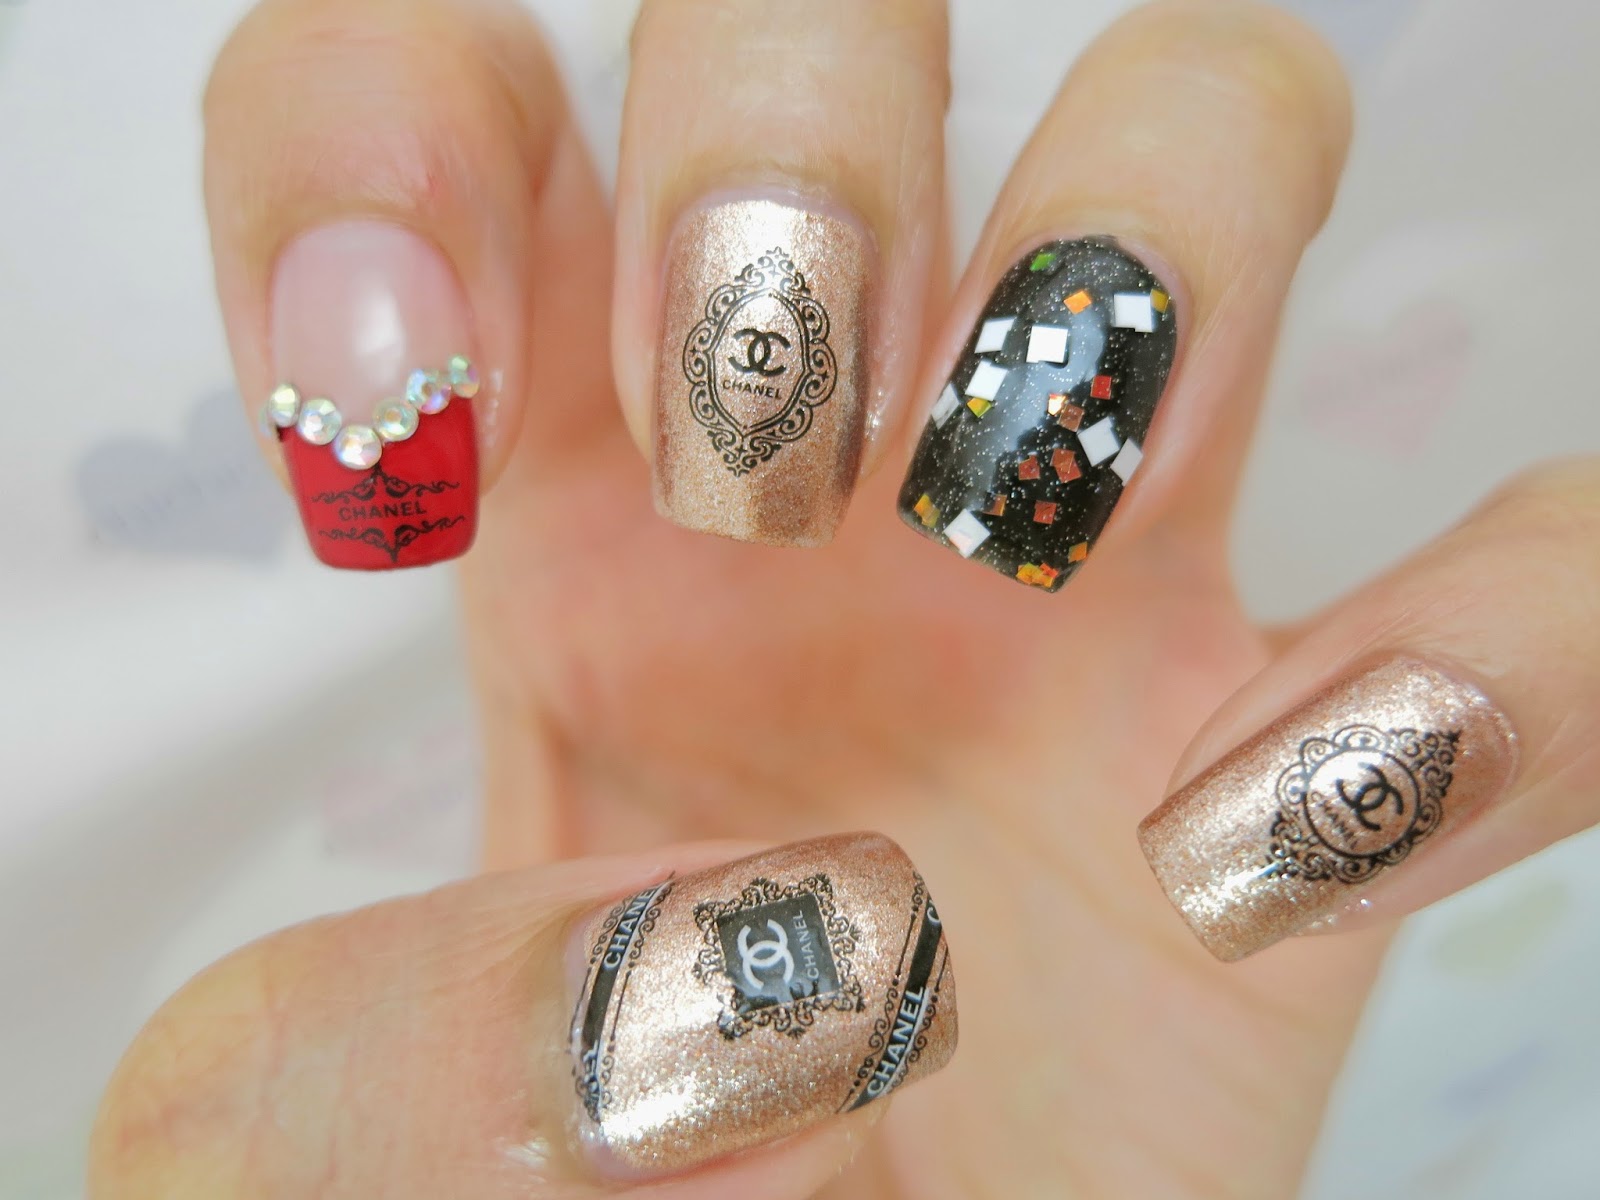 Chanel Nail Stickers - wide 2